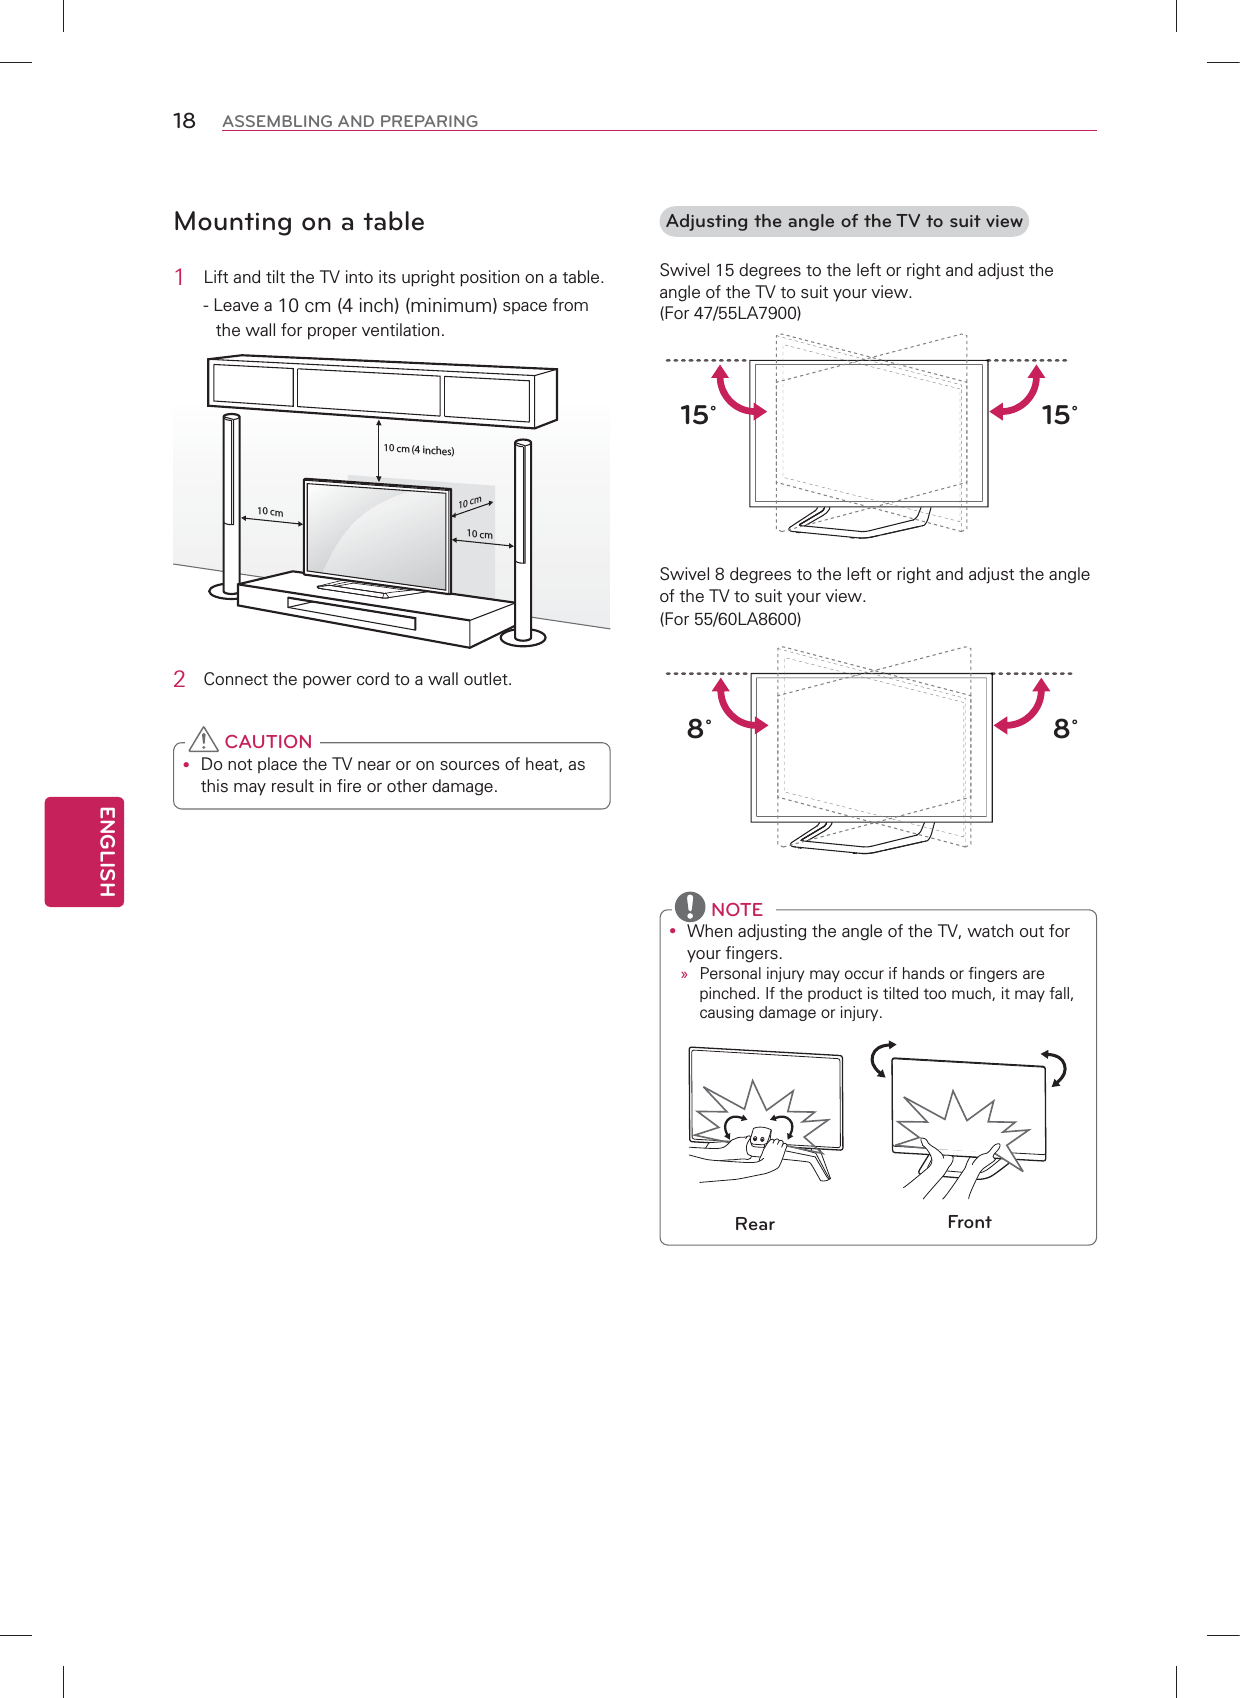 ENGLISH18 ASSEMBLING AND PREPARINGMounting on a table1  Lift and tilt the TV into its upright position on a table.- Leave a 10 cm (4 inch) (minimum) space from the wall for proper ventilation.10 cm10 cm10 cm10 cm2  Connect the power cord to a wall outlet.y Do not place the TV near or on sources of heat, as this may result in fire or other damage. CAUTION(4 inches)Adjusting the angle of the TV to suit viewSwivel 15 degrees to the left or right and adjust the angle of the TV to suit your view. (For 47/55LA7900)15˚15˚Swivel 8 degrees to the left or right and adjust the angle of the TV to suit your view. (For 55/60LA8600)8˚8˚y When adjusting the angle of the TV, watch out for your fingers.»Personal injury may occur if hands or fingers are pinched. If the product is tilted too much, it may fall, causing damage or injury.Rear Front NOTE